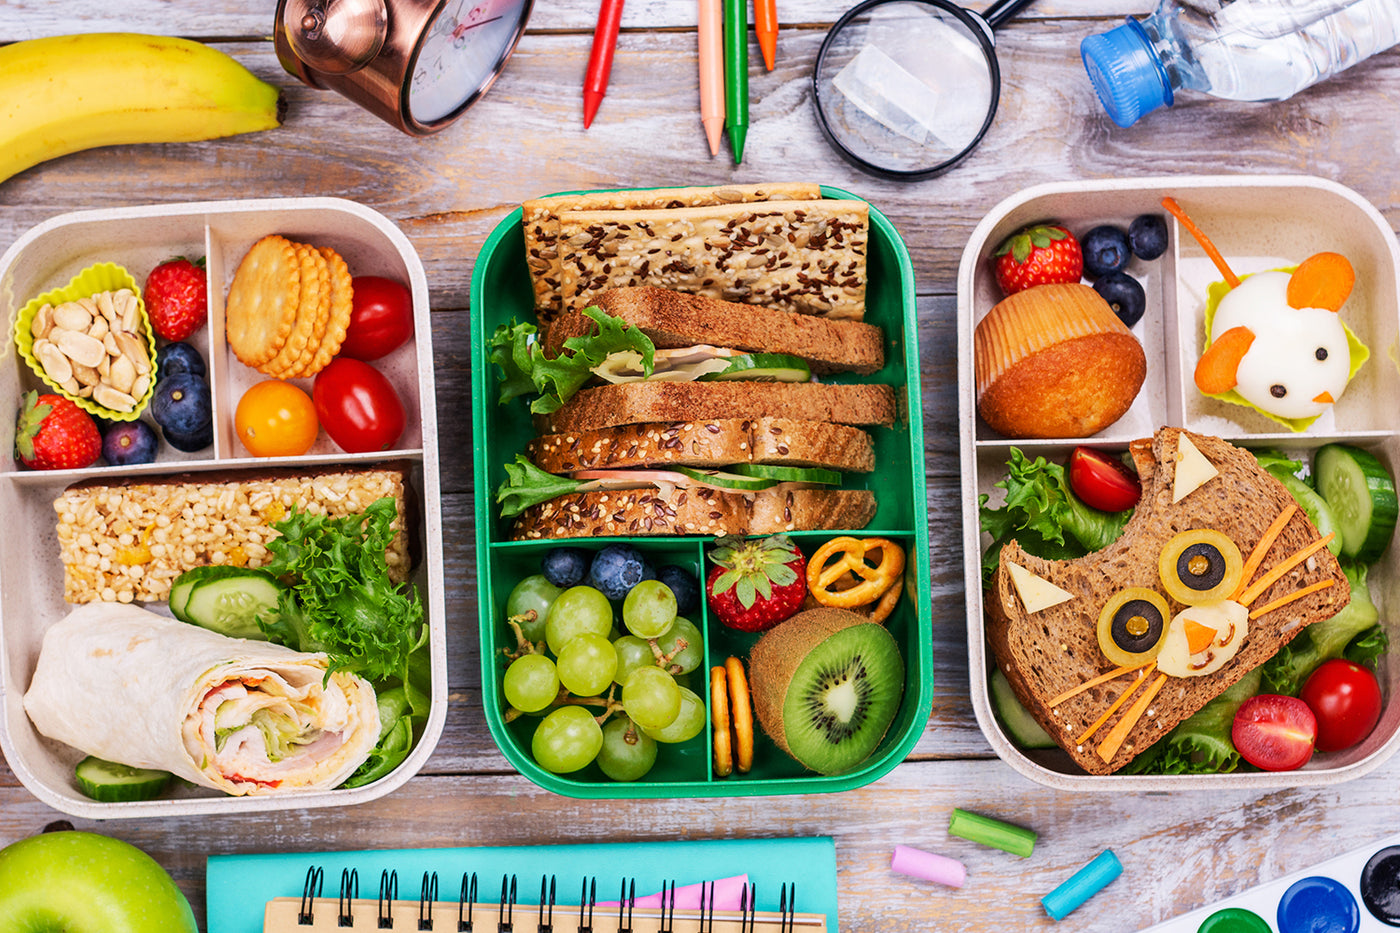 Healthy veggie-full lunchbox ideas that will appeal